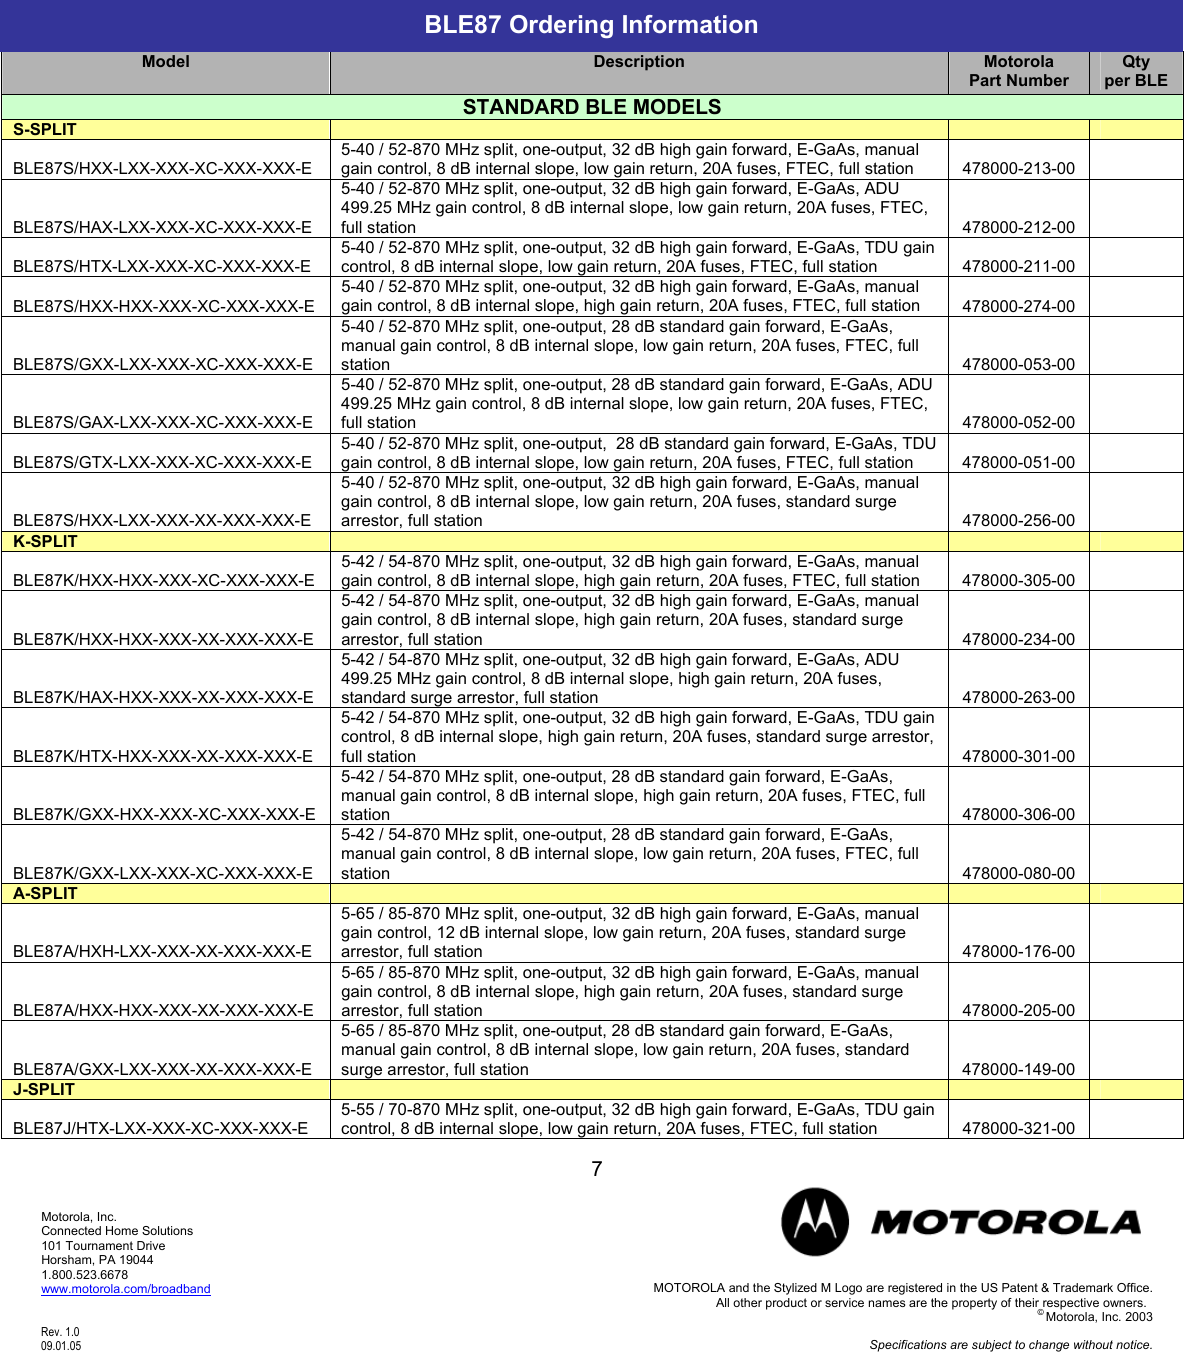 Page 7 of 9 - Motorola Motorola-Ble87-Users-Manual BLE_Catalog_Specifications_9-1-05